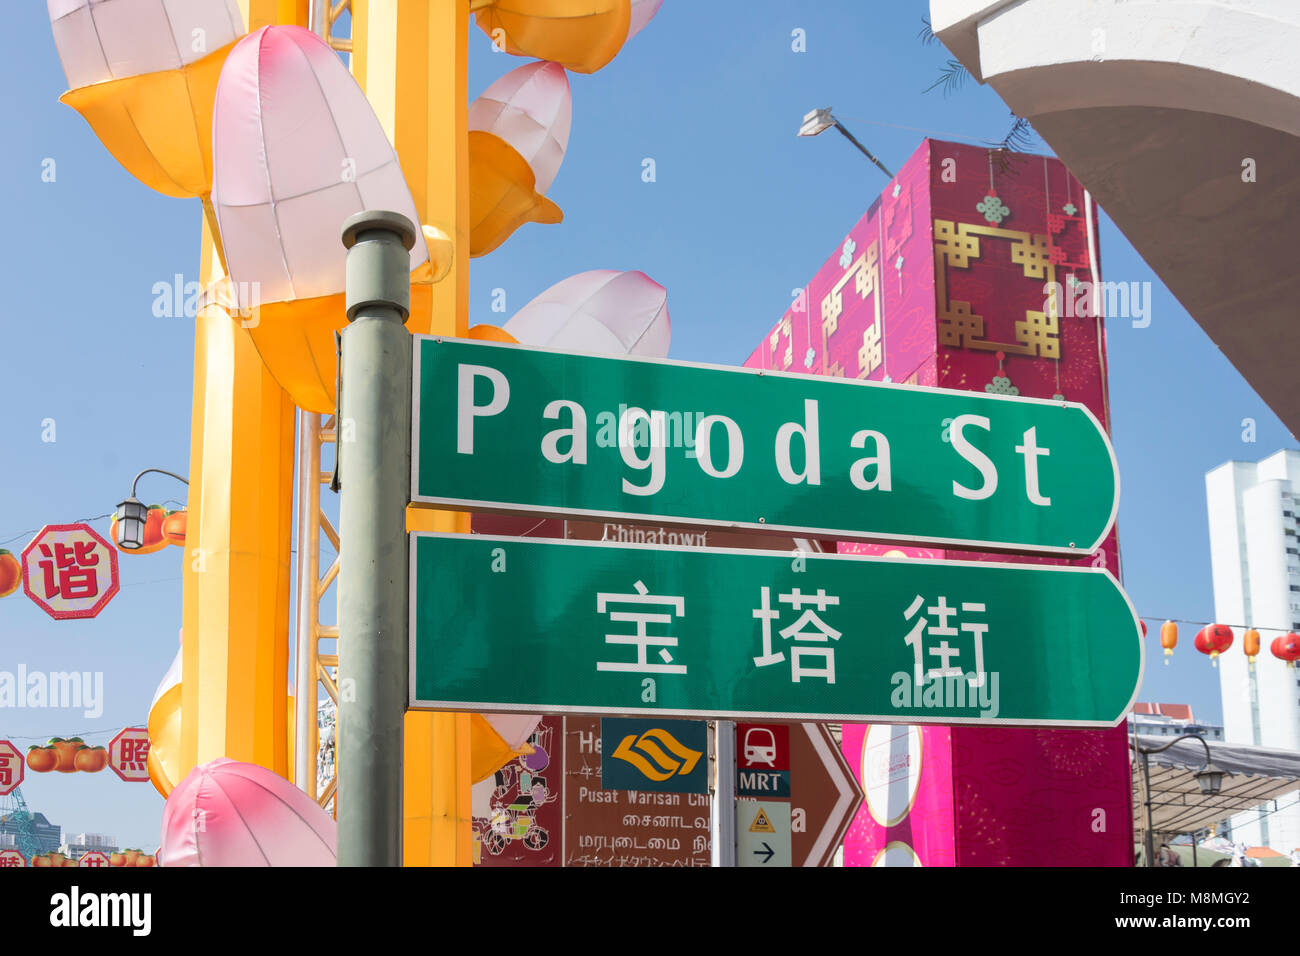 Pagoda Street sign, Chinatown, Outram District, Central Area, Singapore Island (Pulau Ujong), Singapore Stock Photo